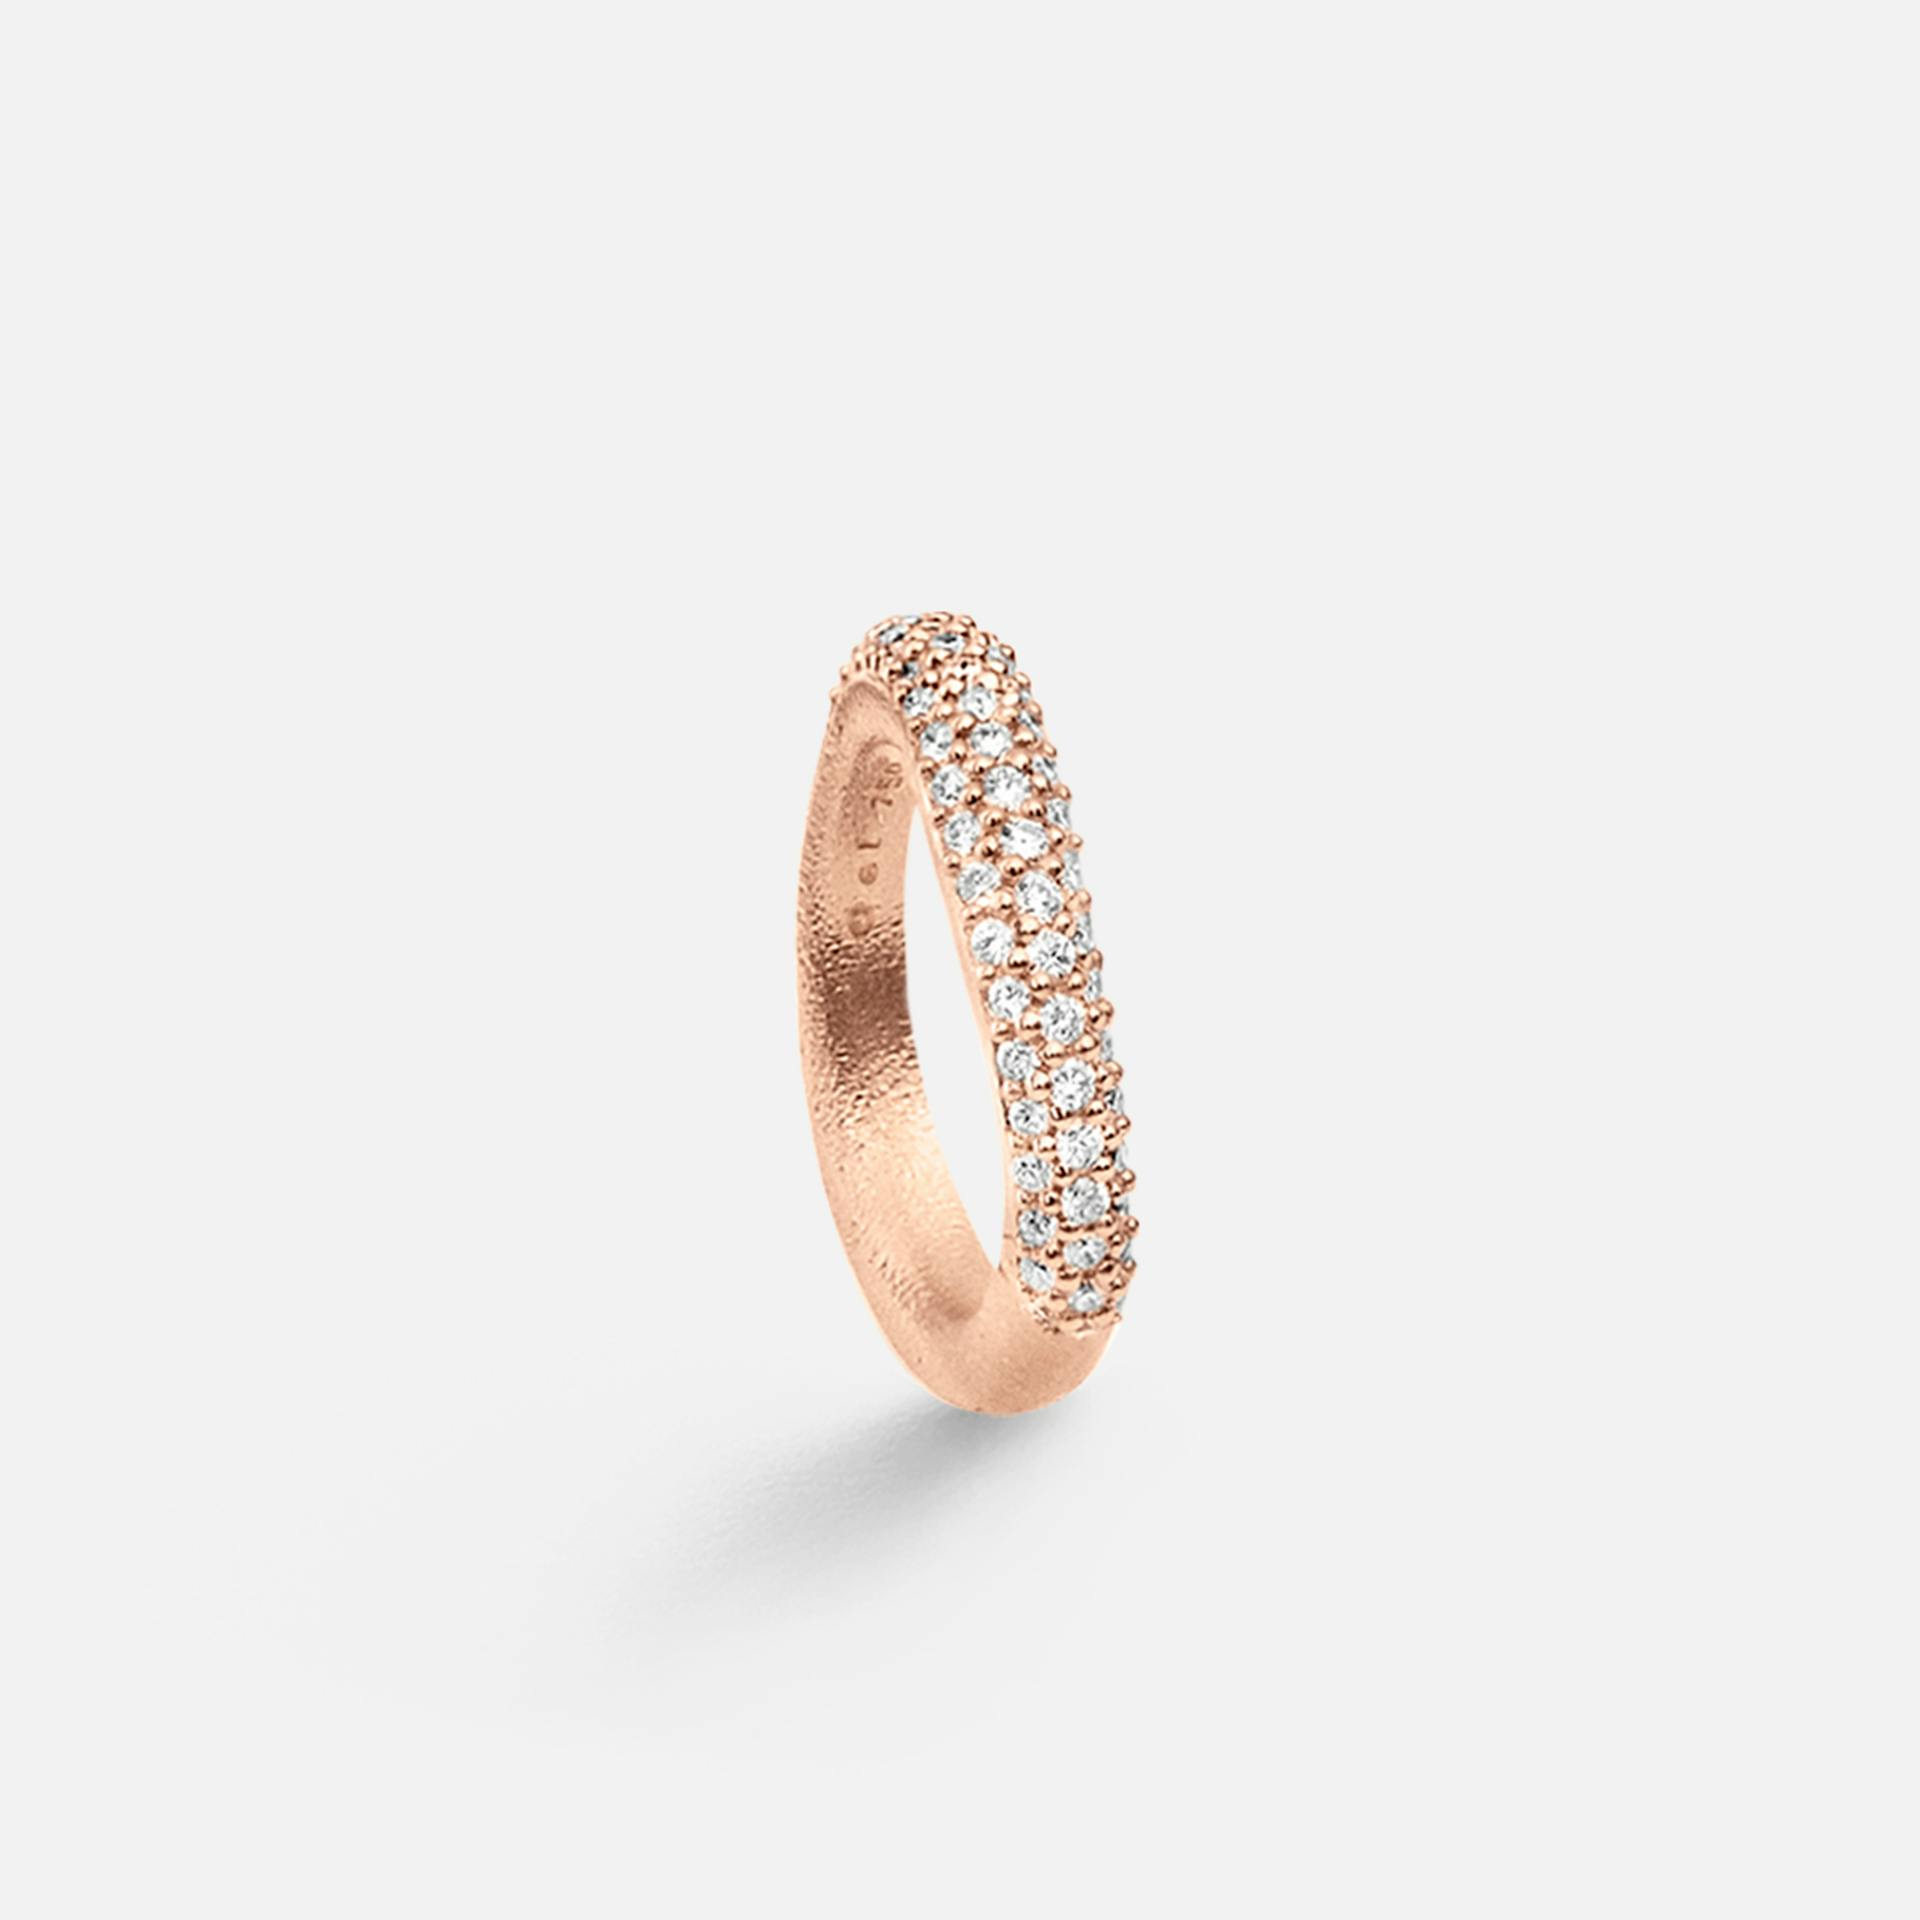 Love ring 4 18k rose gold textured and diamonds 0.71 ct. TW. VS.